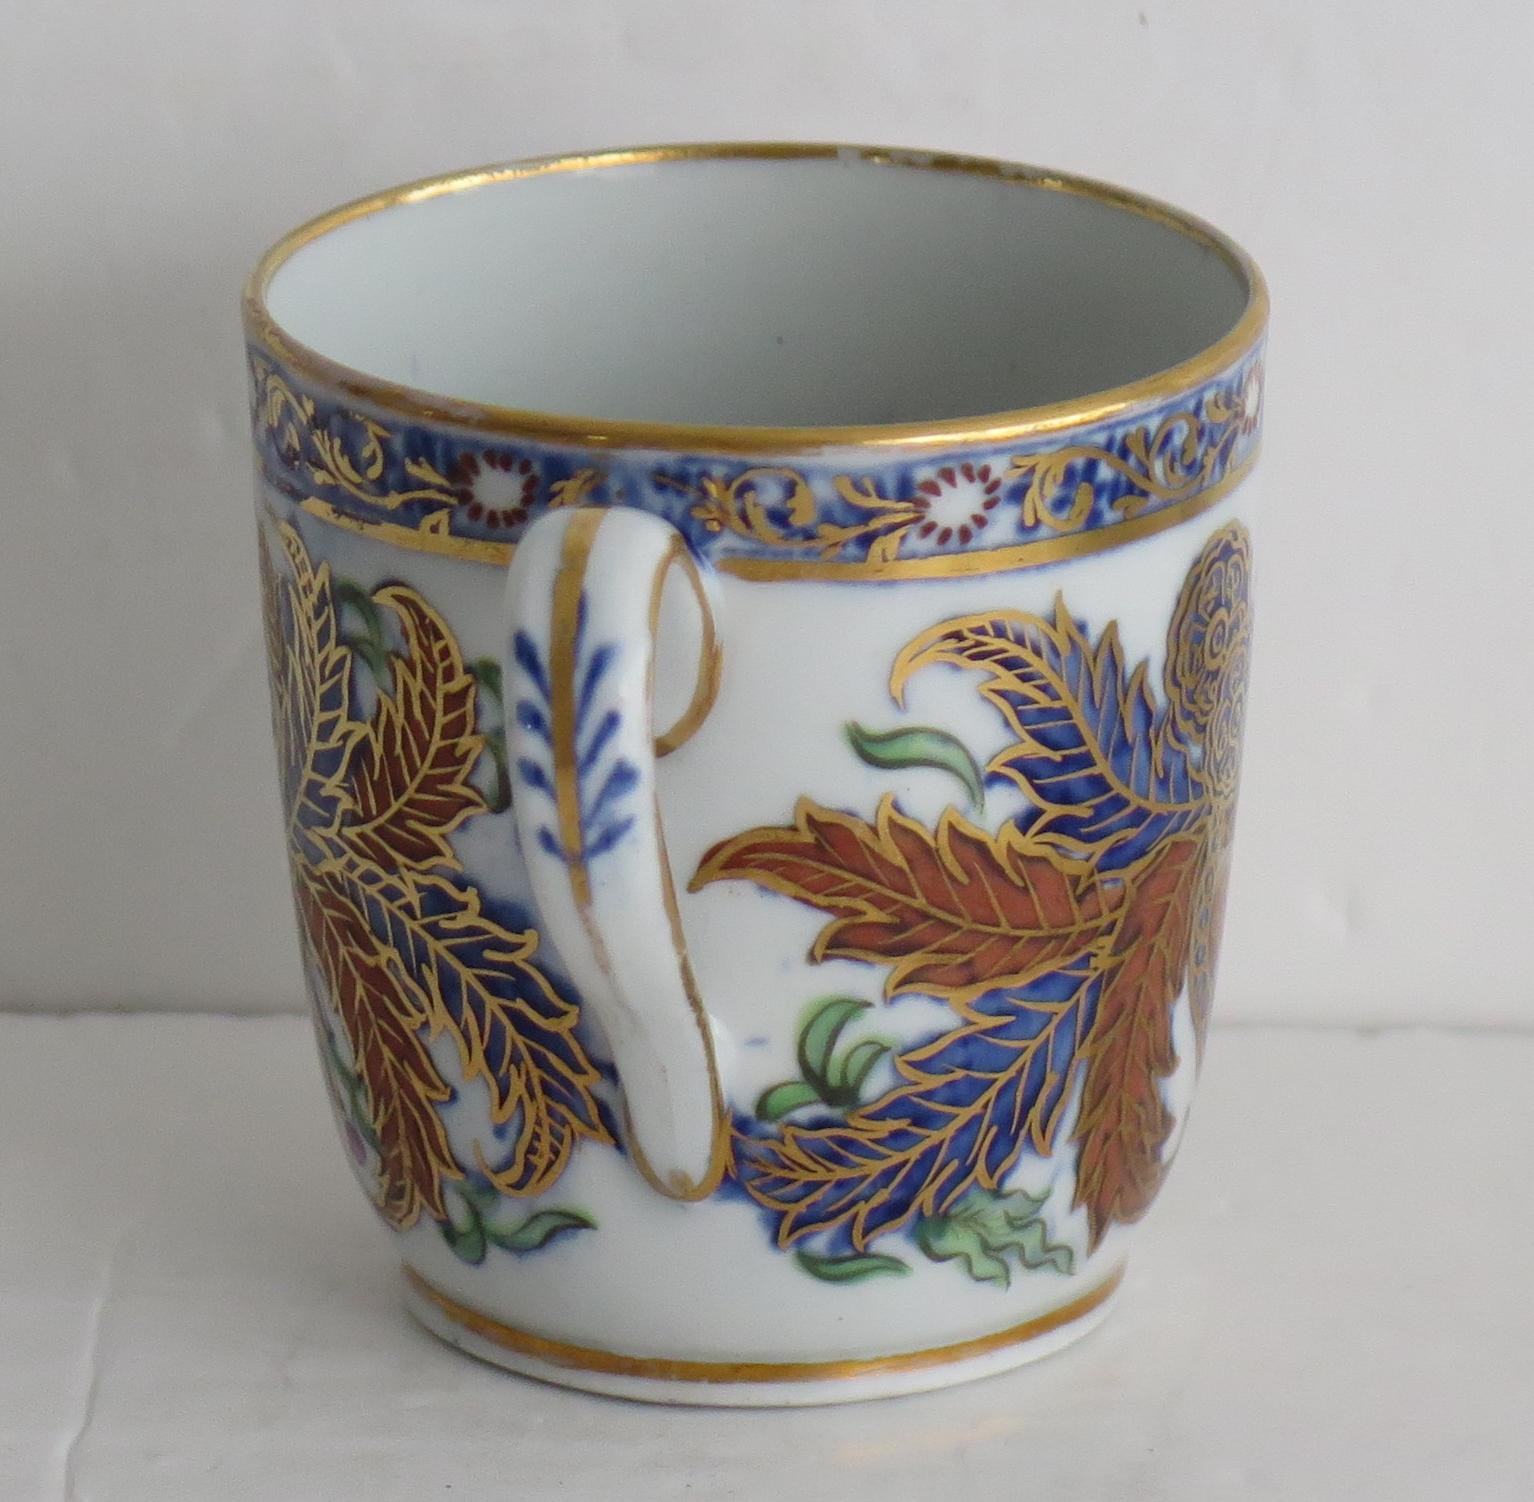 Glazed 18th Century Newhall Porcelain Duo Coffee Cup and Saucer Pattern 274, Circa 1795